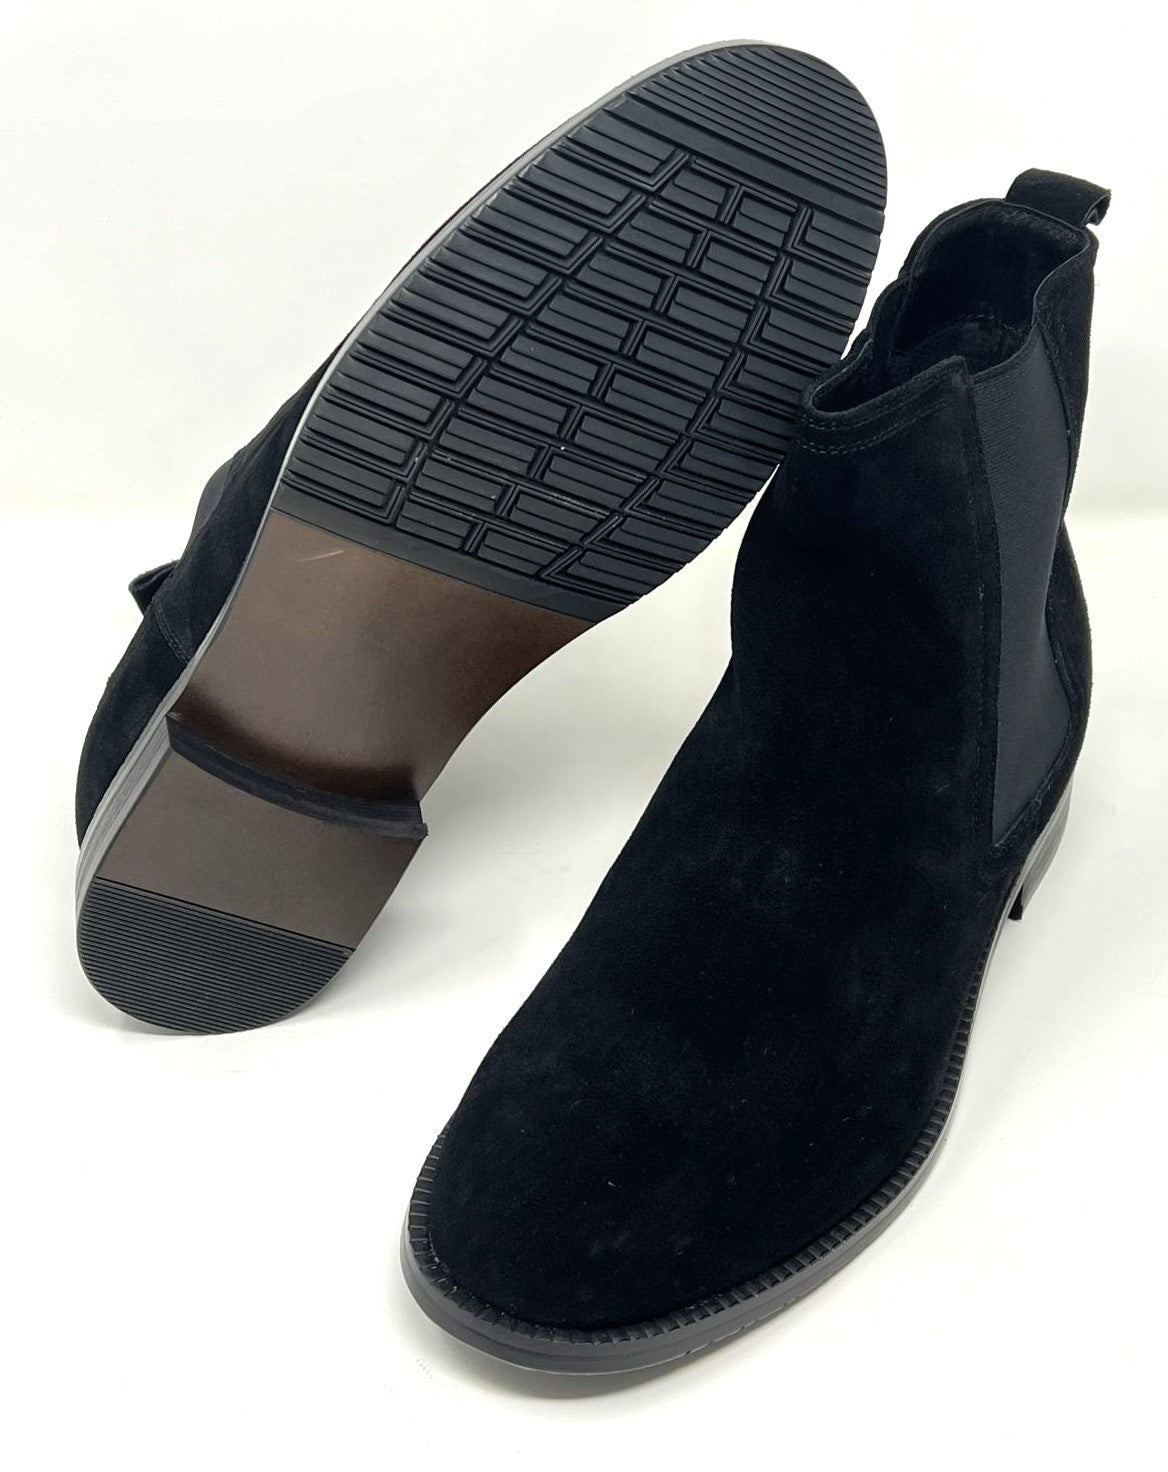 FSJ0077 - 2.9 Inches Taller (Black) - Size 9 Only